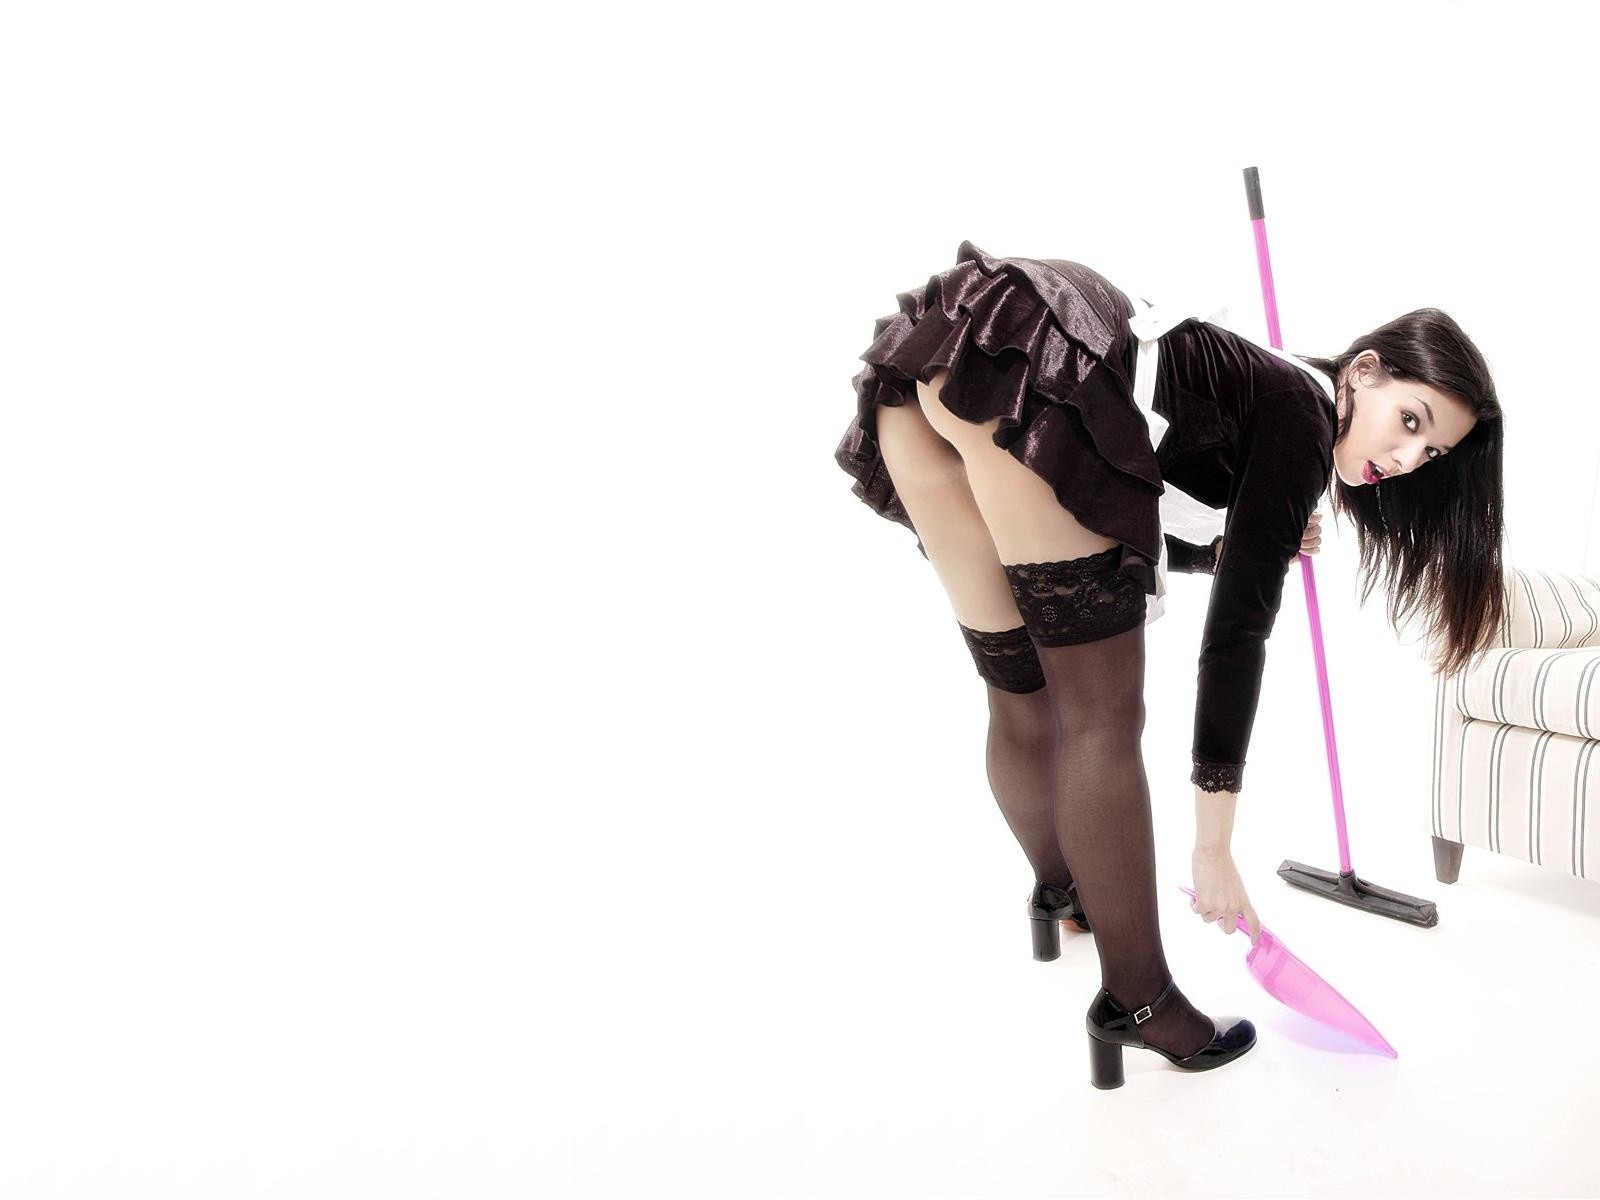 alfred siu recommends French Maid Bent Over